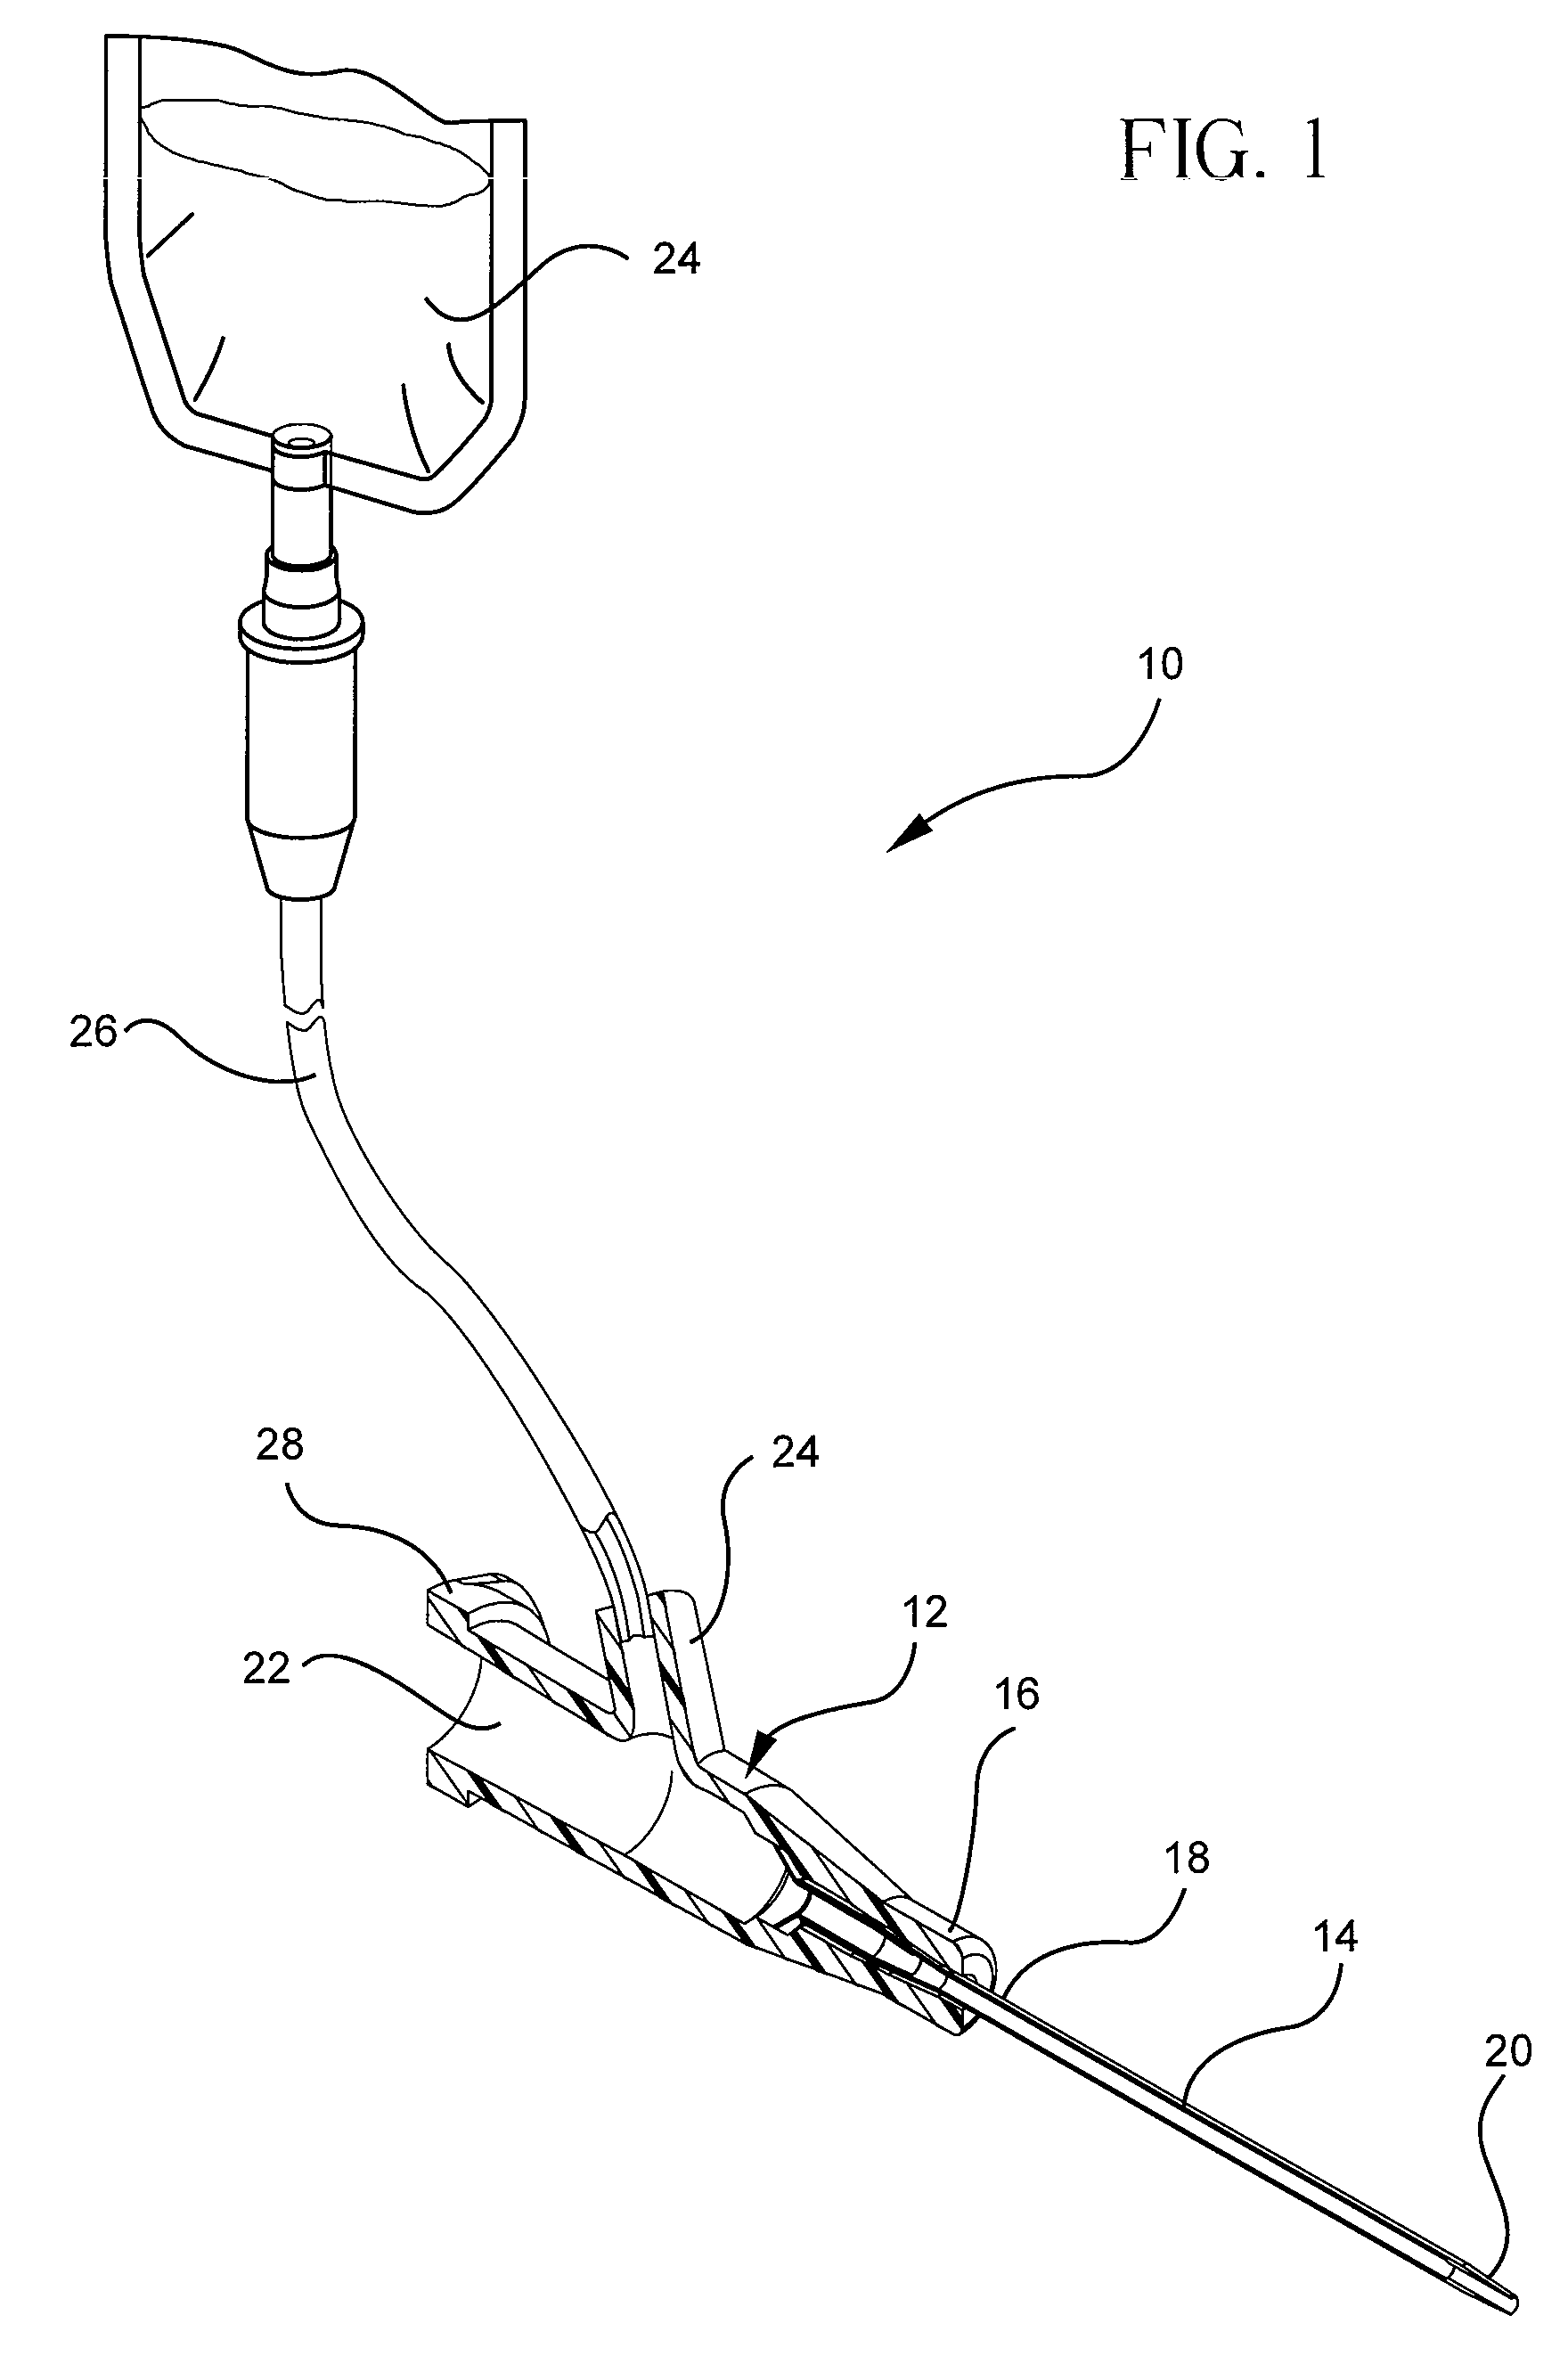 Occlusion resistant catheters